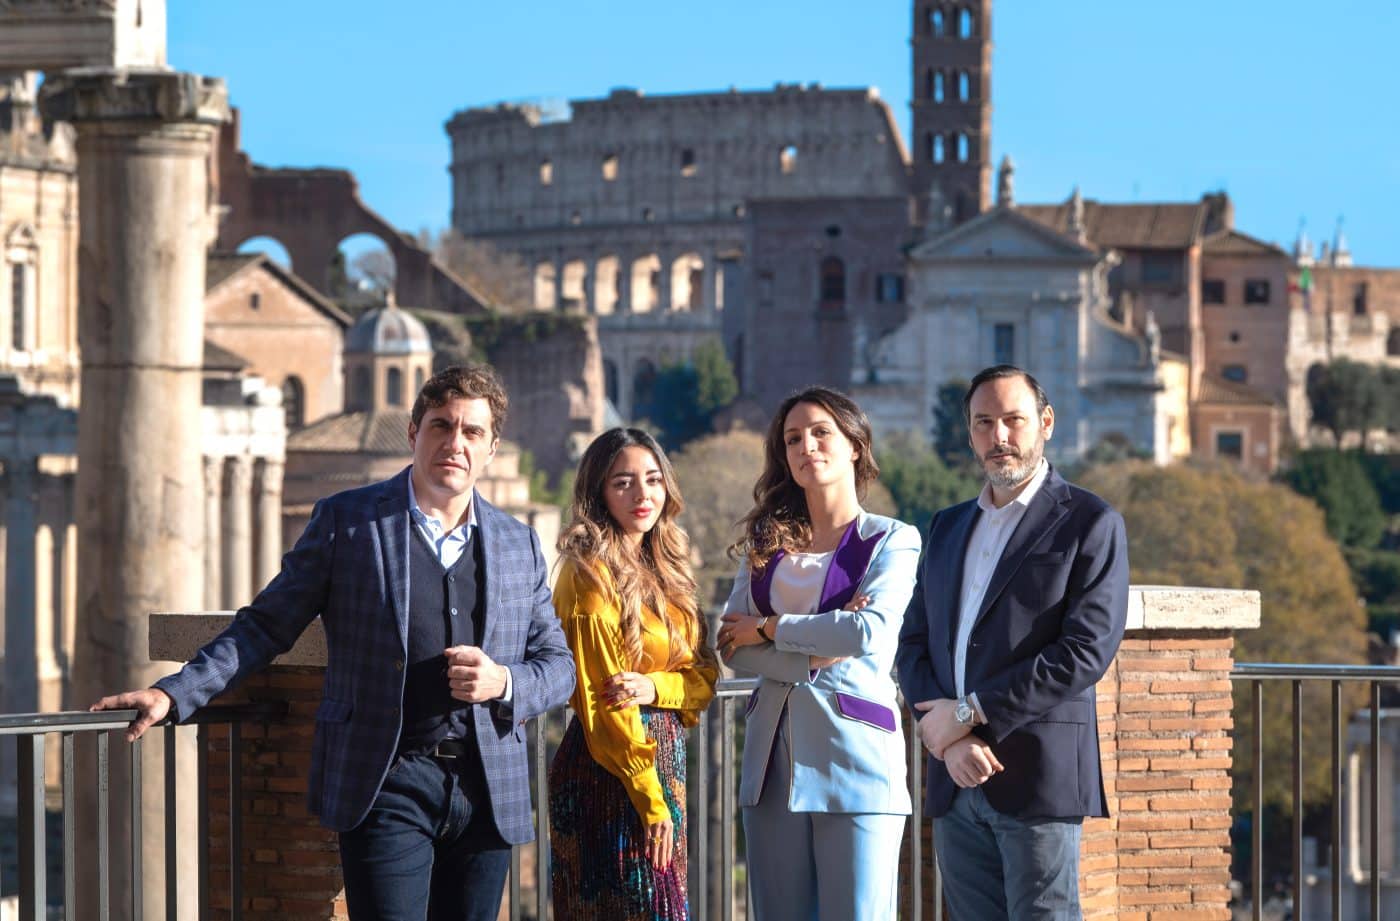 Alessandro Cutelli della Raiata and Silvia D'Ambrosio, who are partners in the company and a married couple; and Alessandra Antinori, another partner in the company, who is married to Andrea Landolfi, CEO of Italian Fine Jewels S.R.L and owner of Antinori Fine Jewels